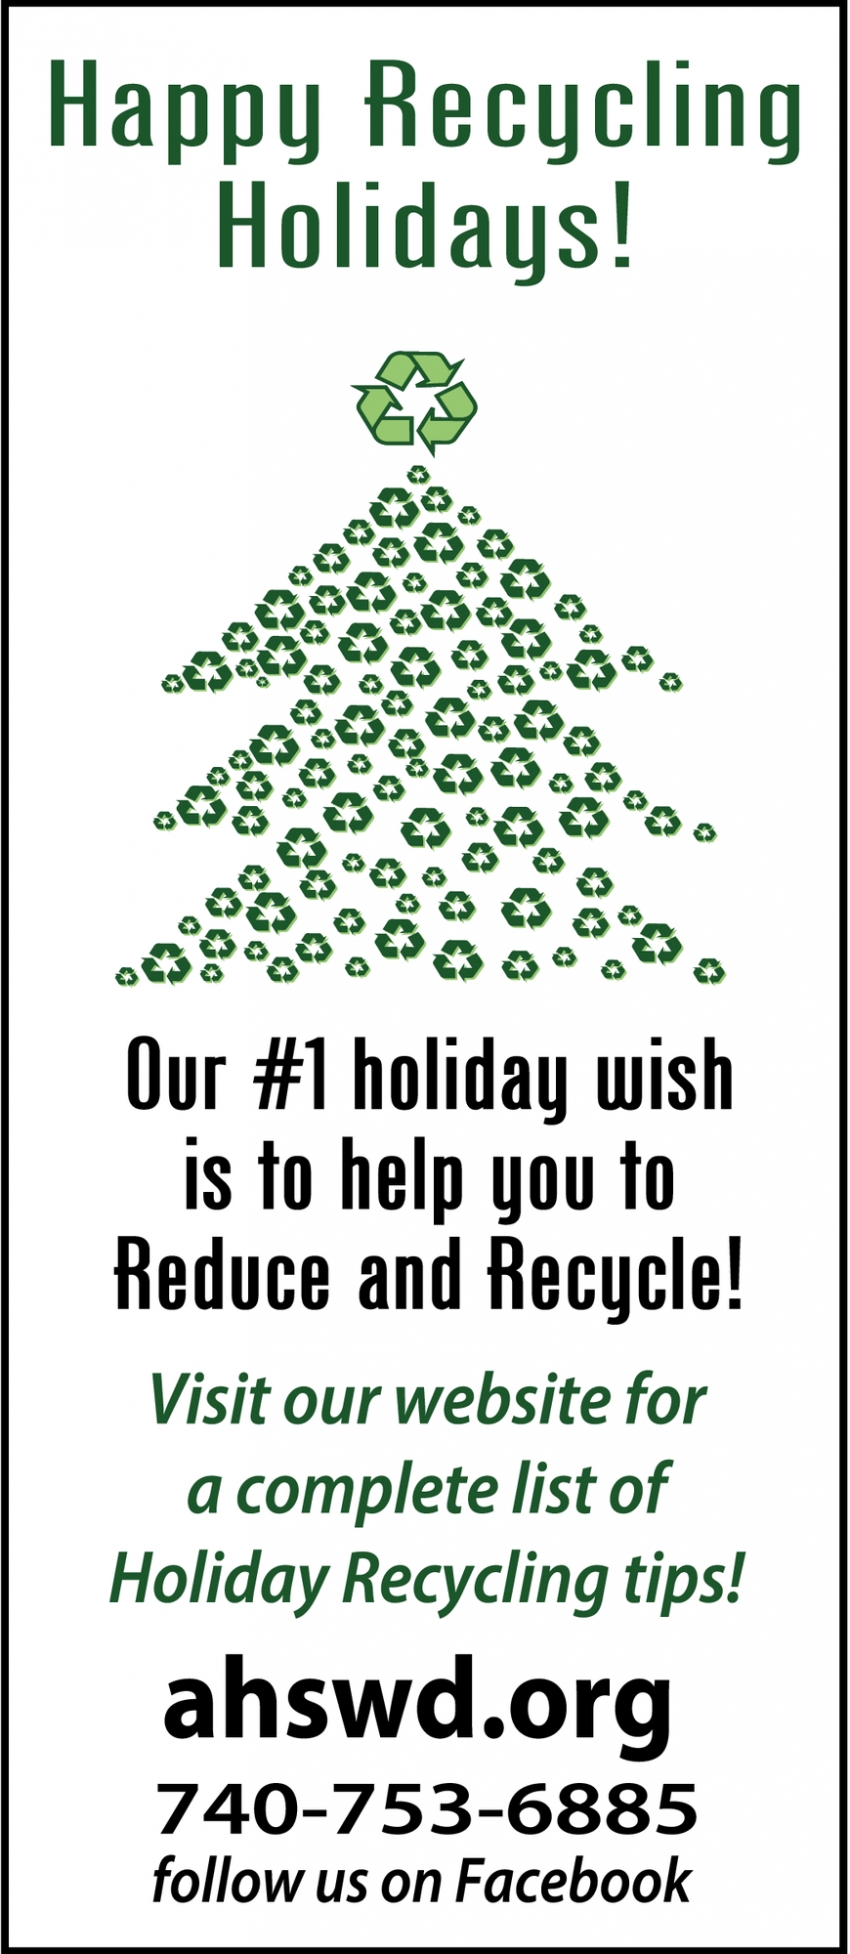 Happy Recycling Holidays!